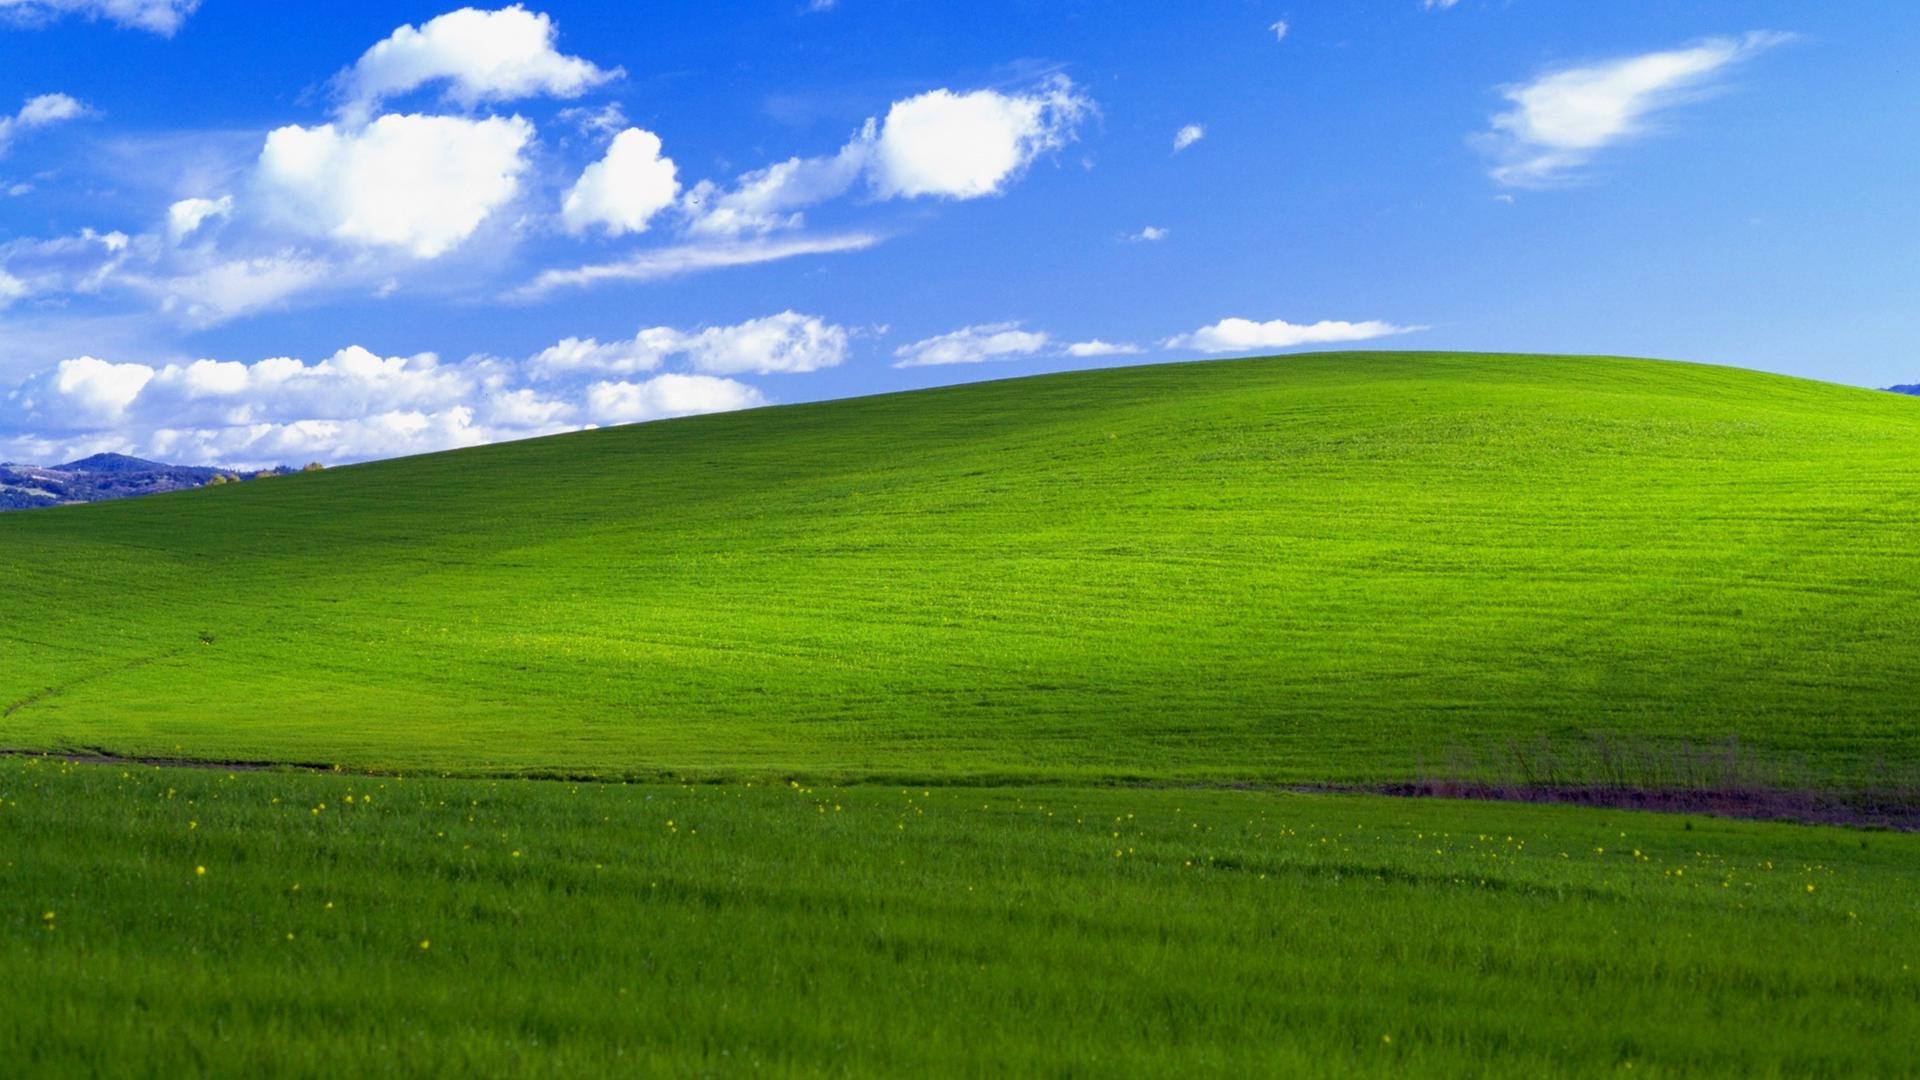 Windows Xp - Funny Meeting Backgrounds